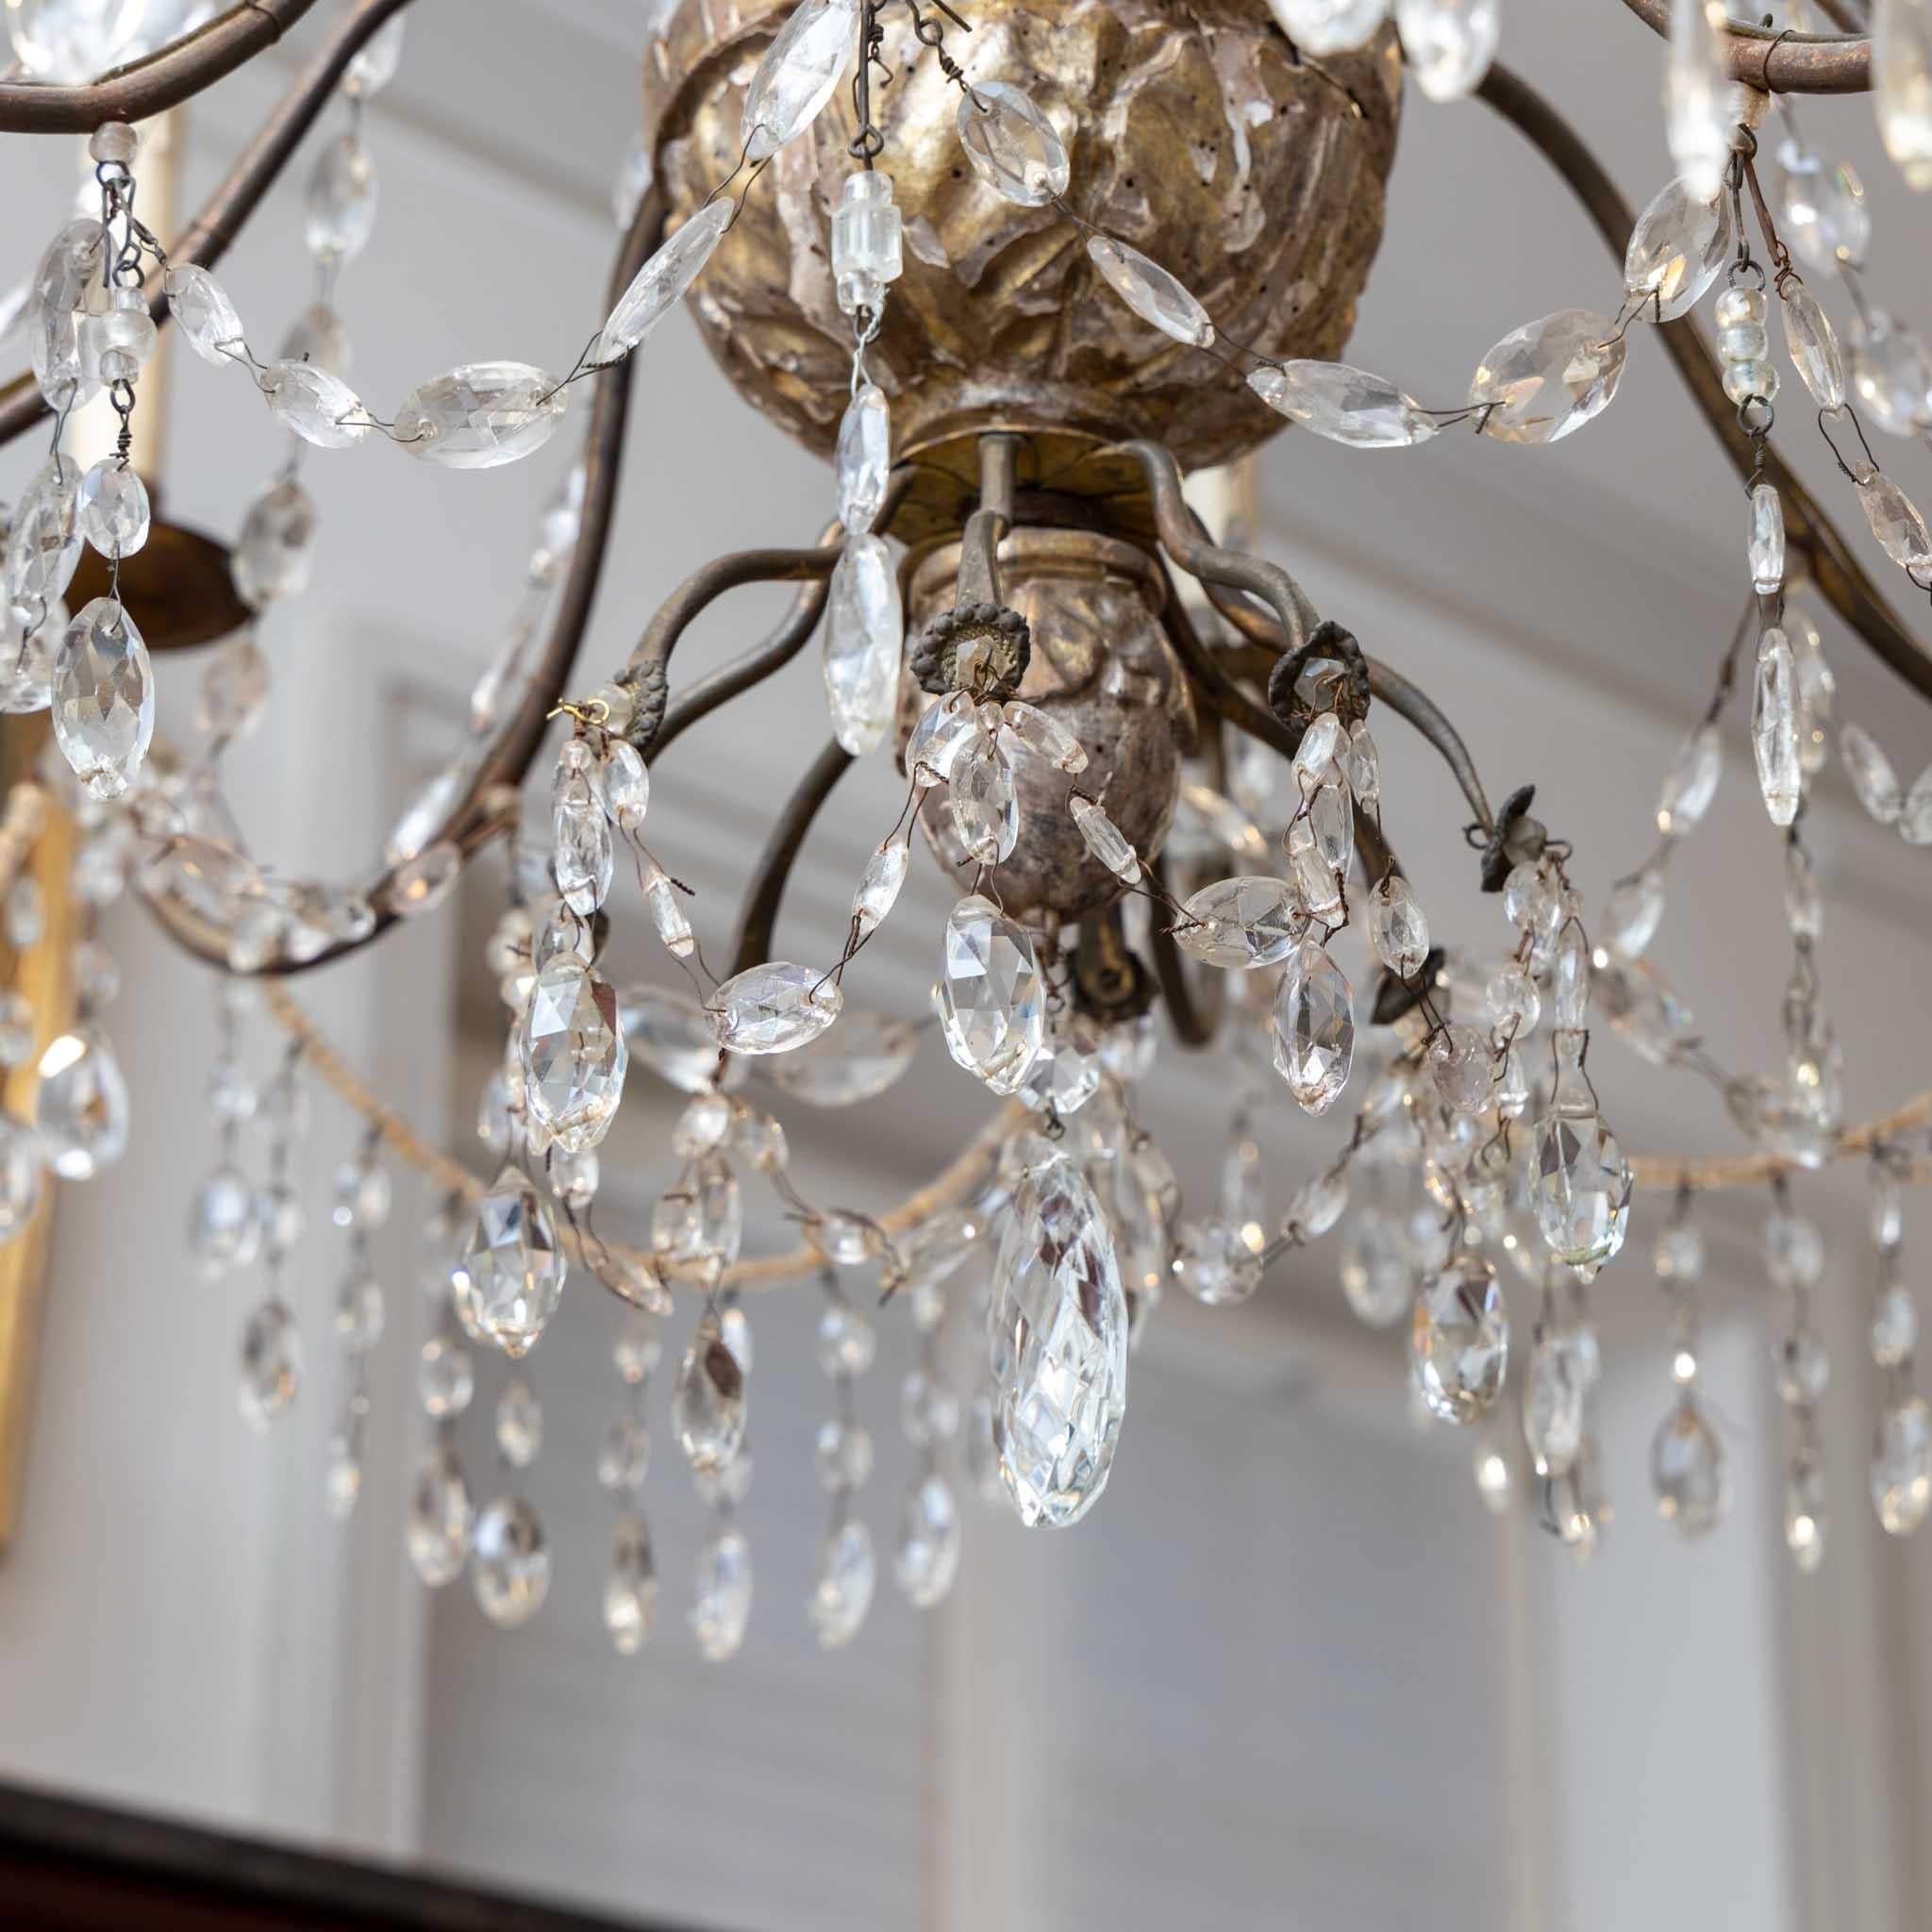 Italian Genoese Chandelier, Italy, 18th Century For Sale